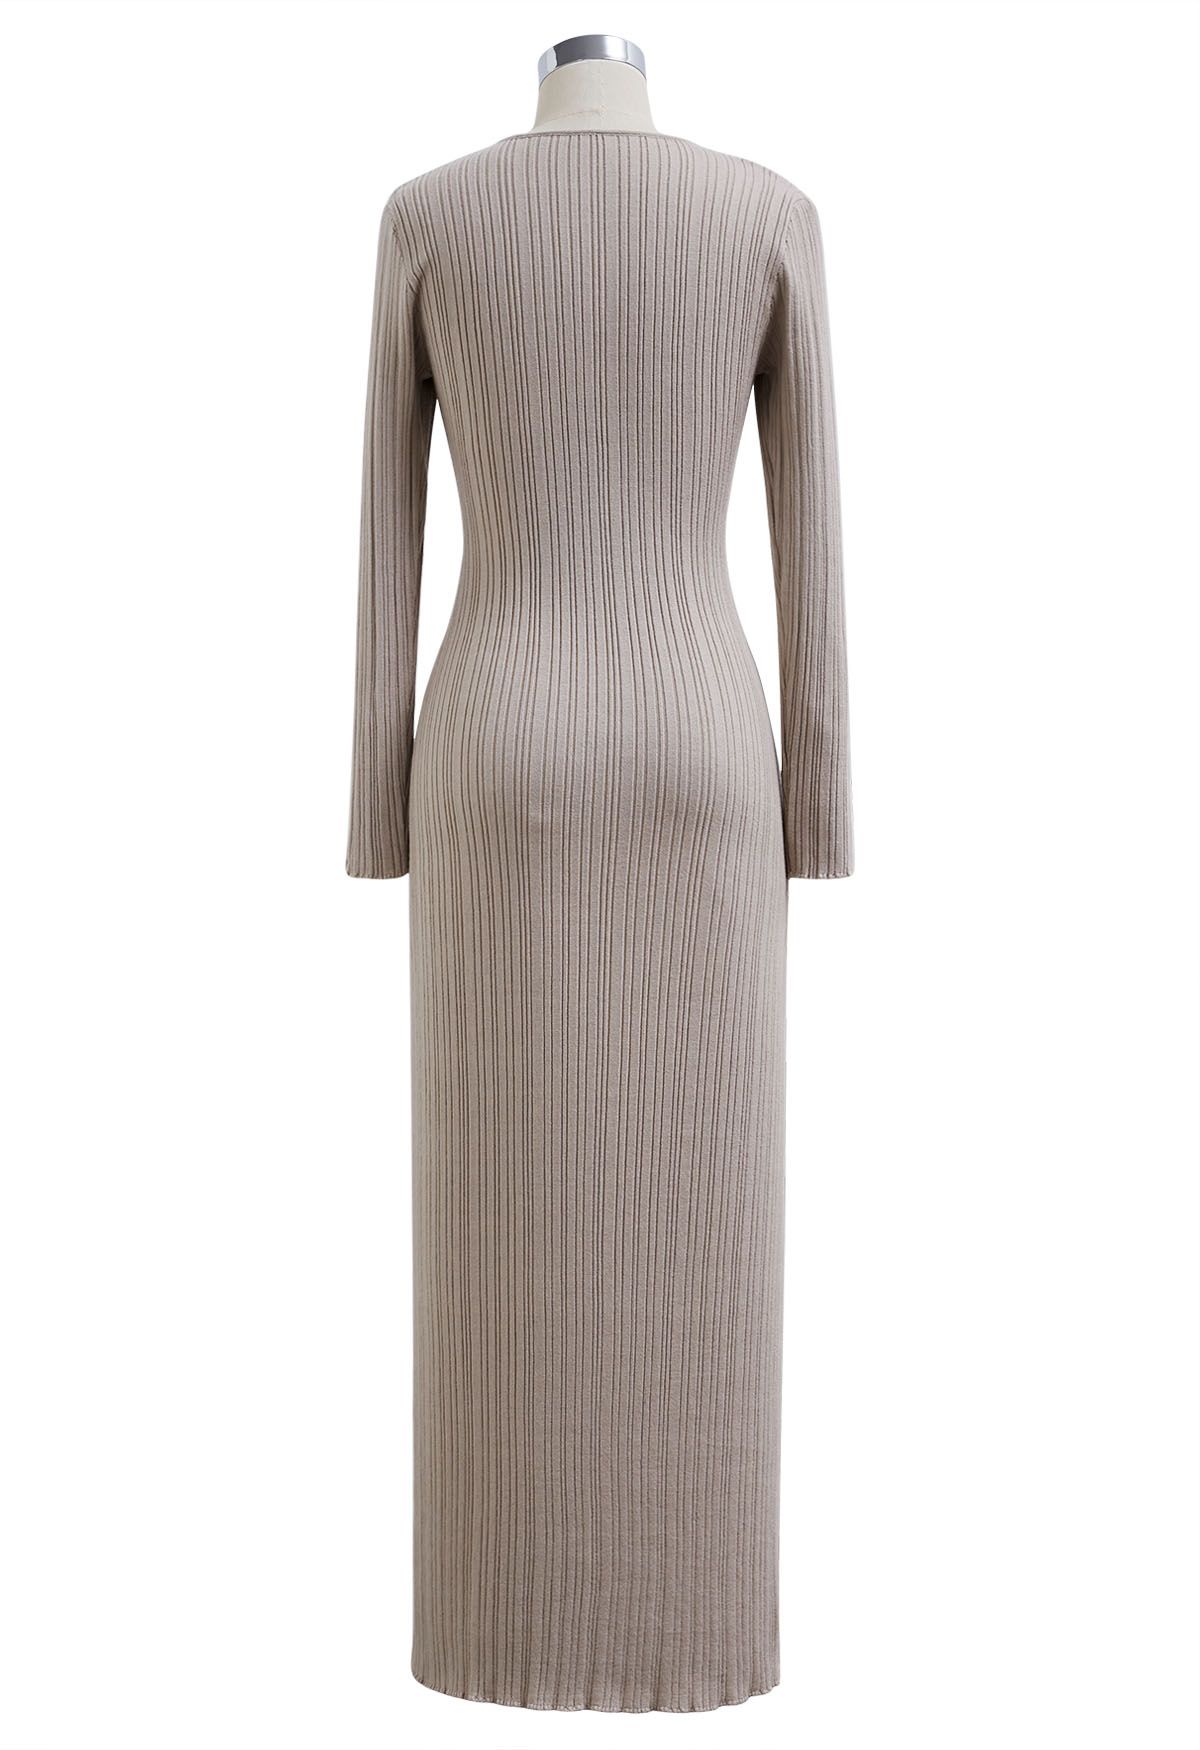 Stripe Texture Fitted Knit Maxi Dress in Oatmeal